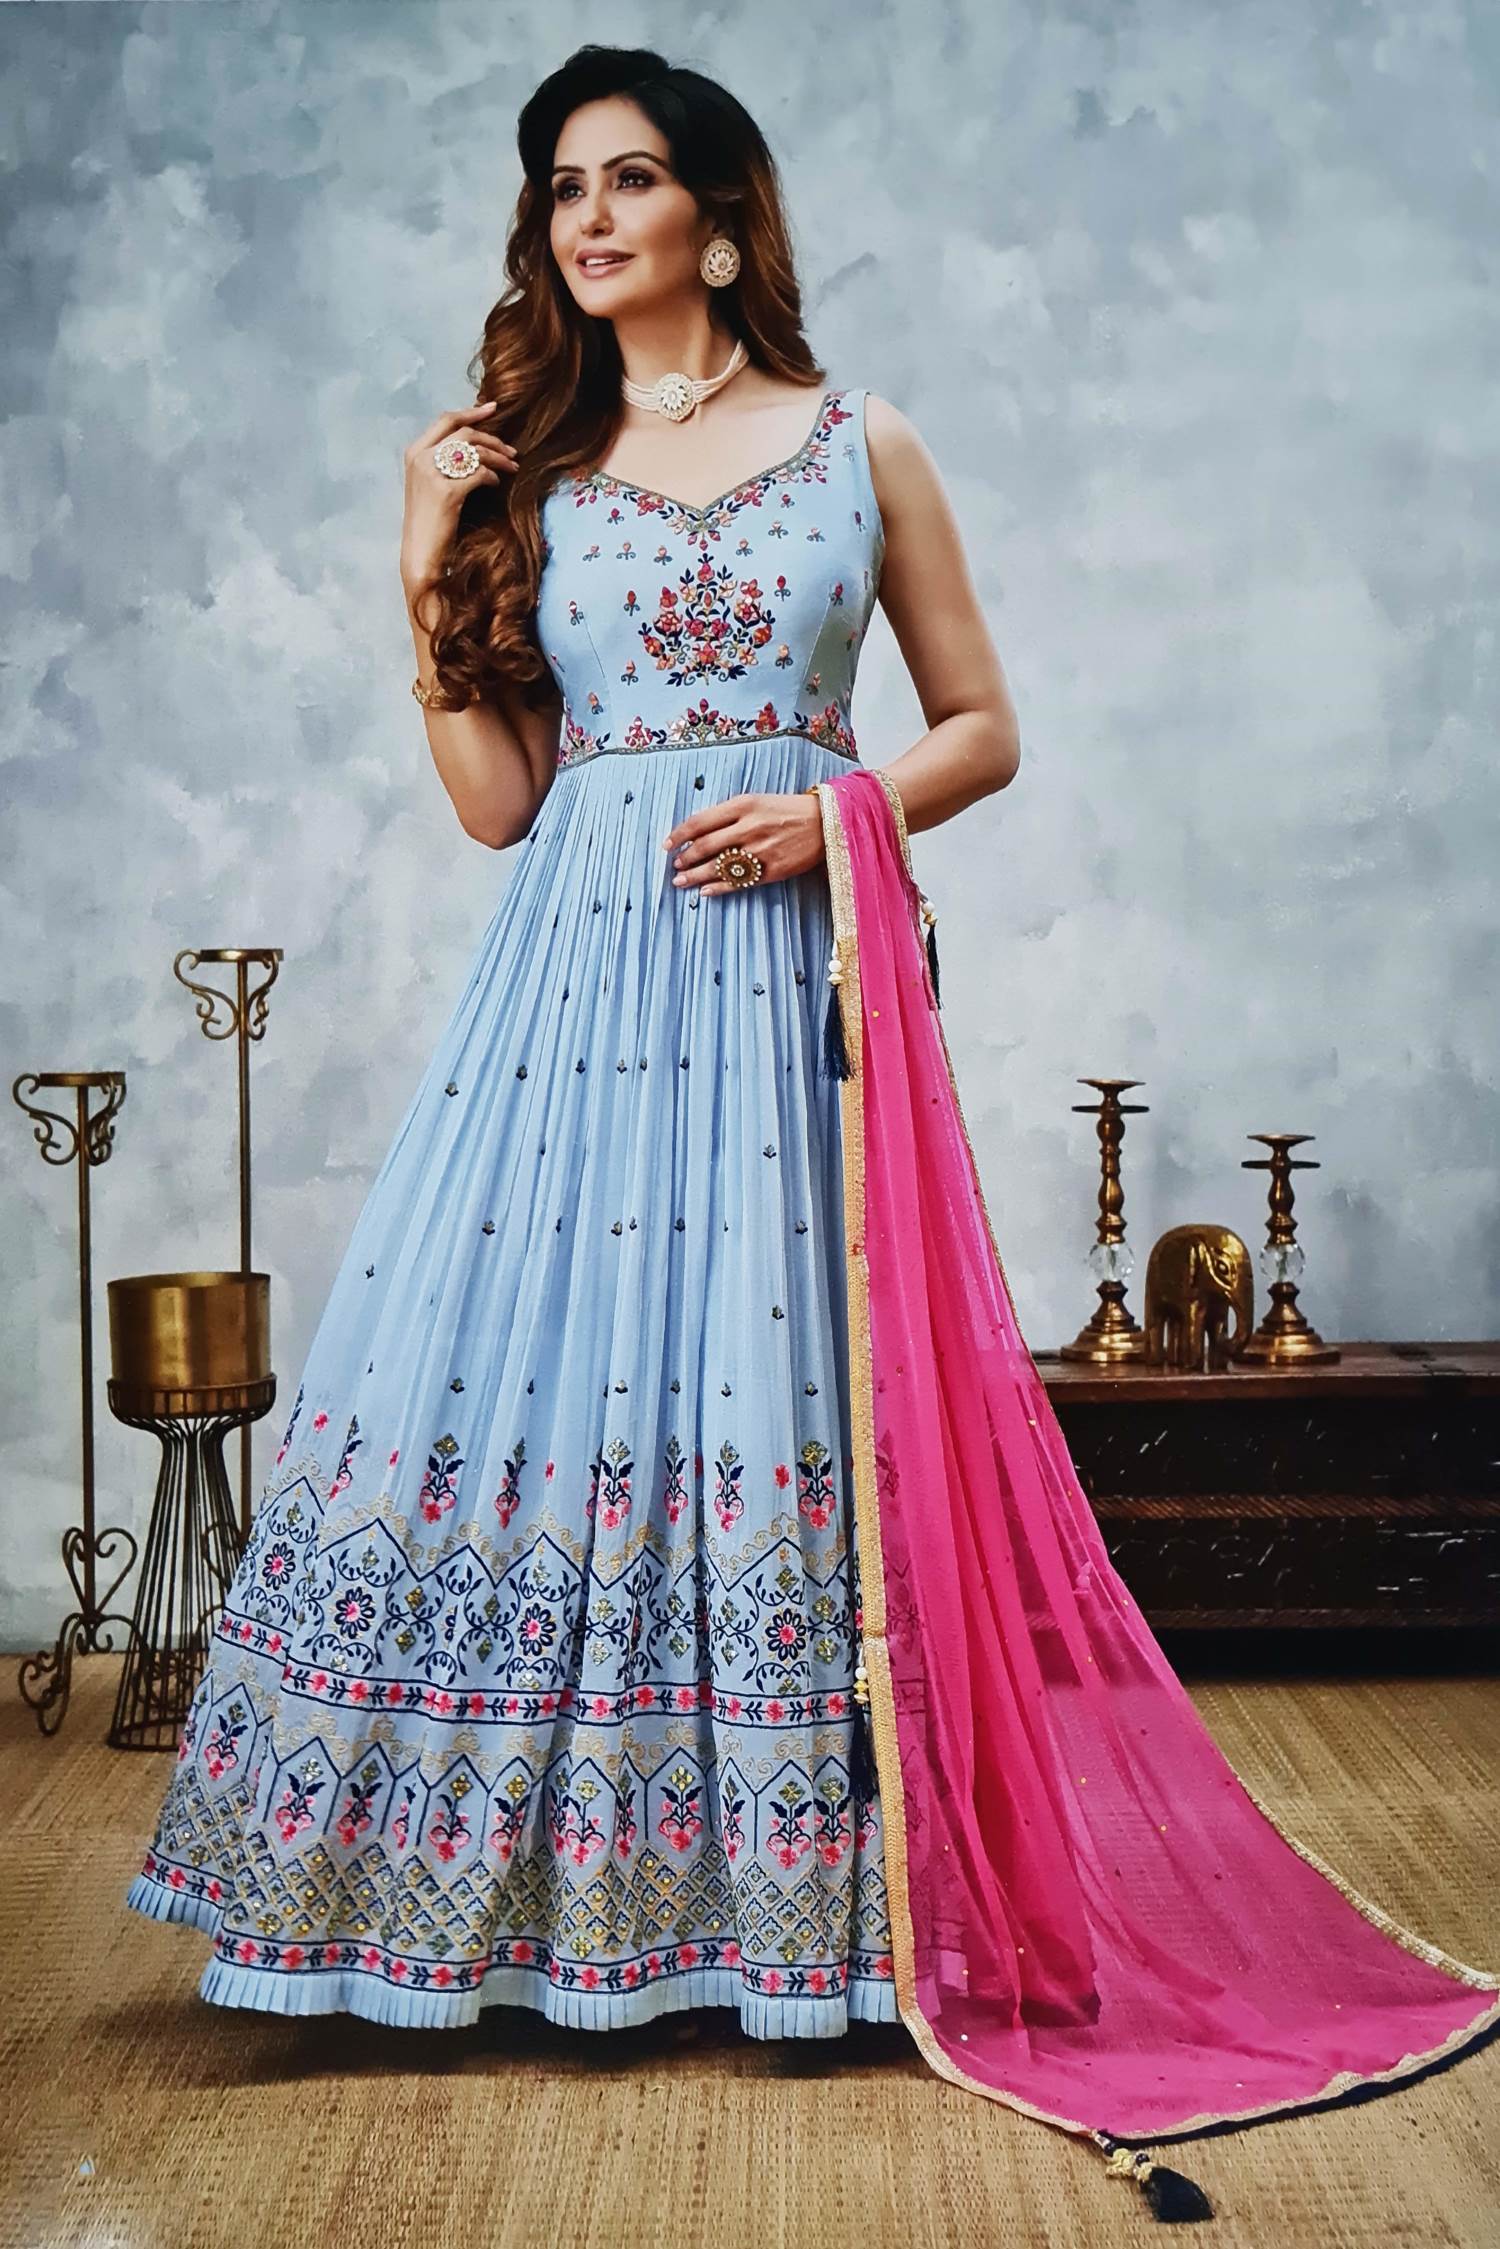 Vikafab Indian Party Wear Gown for Women with Georgette Duppata and Pink & Sky  Blue Color Anarkali Suit Ready to Wear B-11, Blue, 36 : Amazon.com.au:  Clothing, Shoes & Accessories